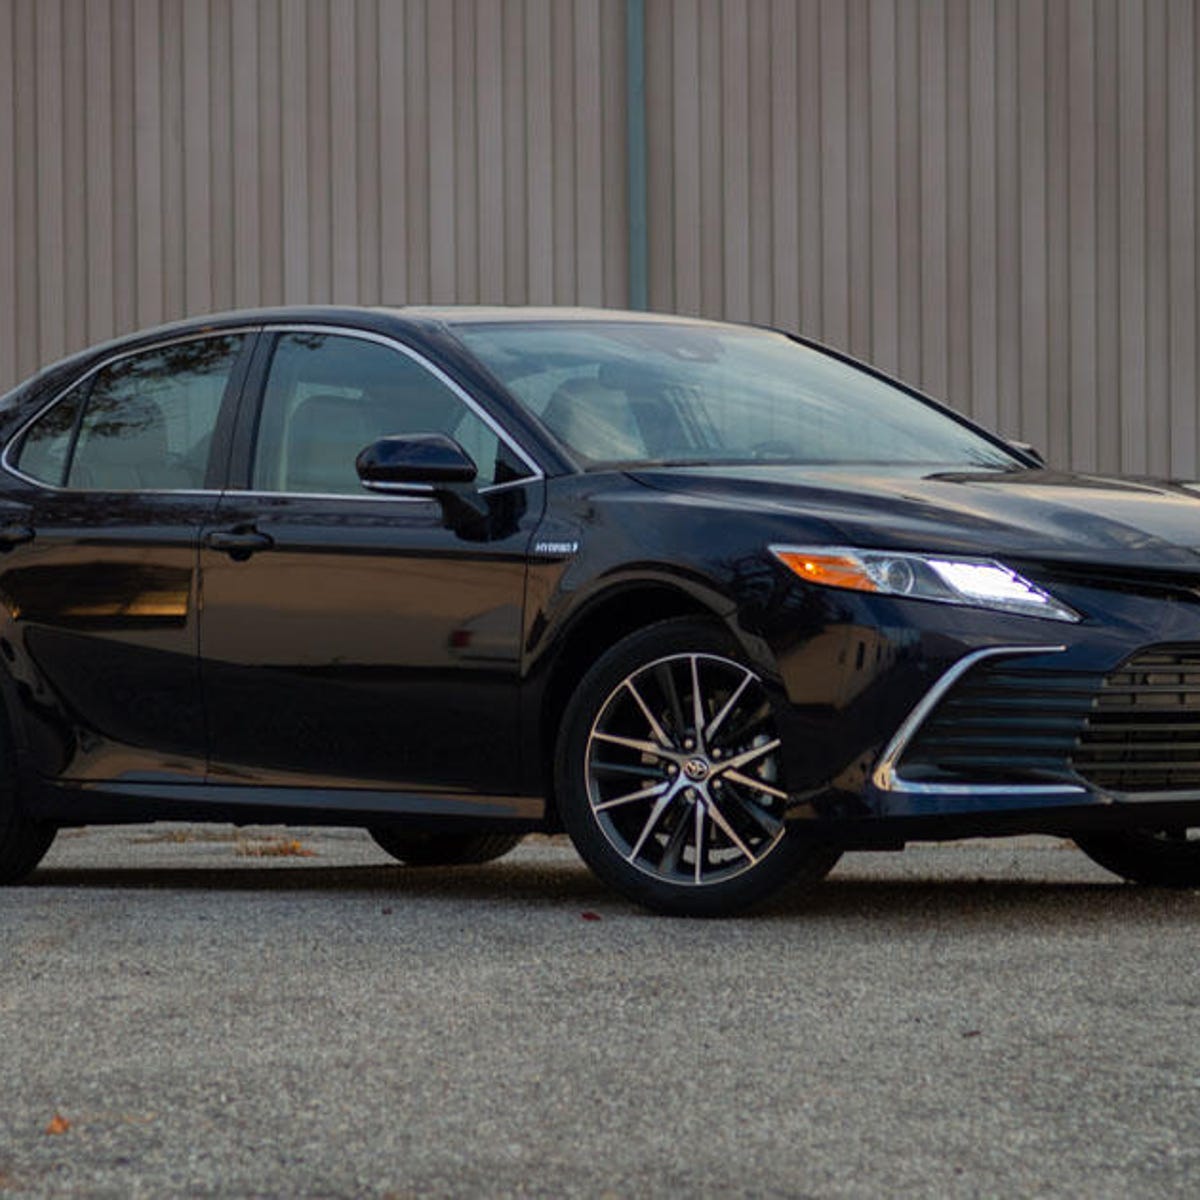 2021 Toyota Camry Hybrid first drive review: A hard formula to mess up -  CNET